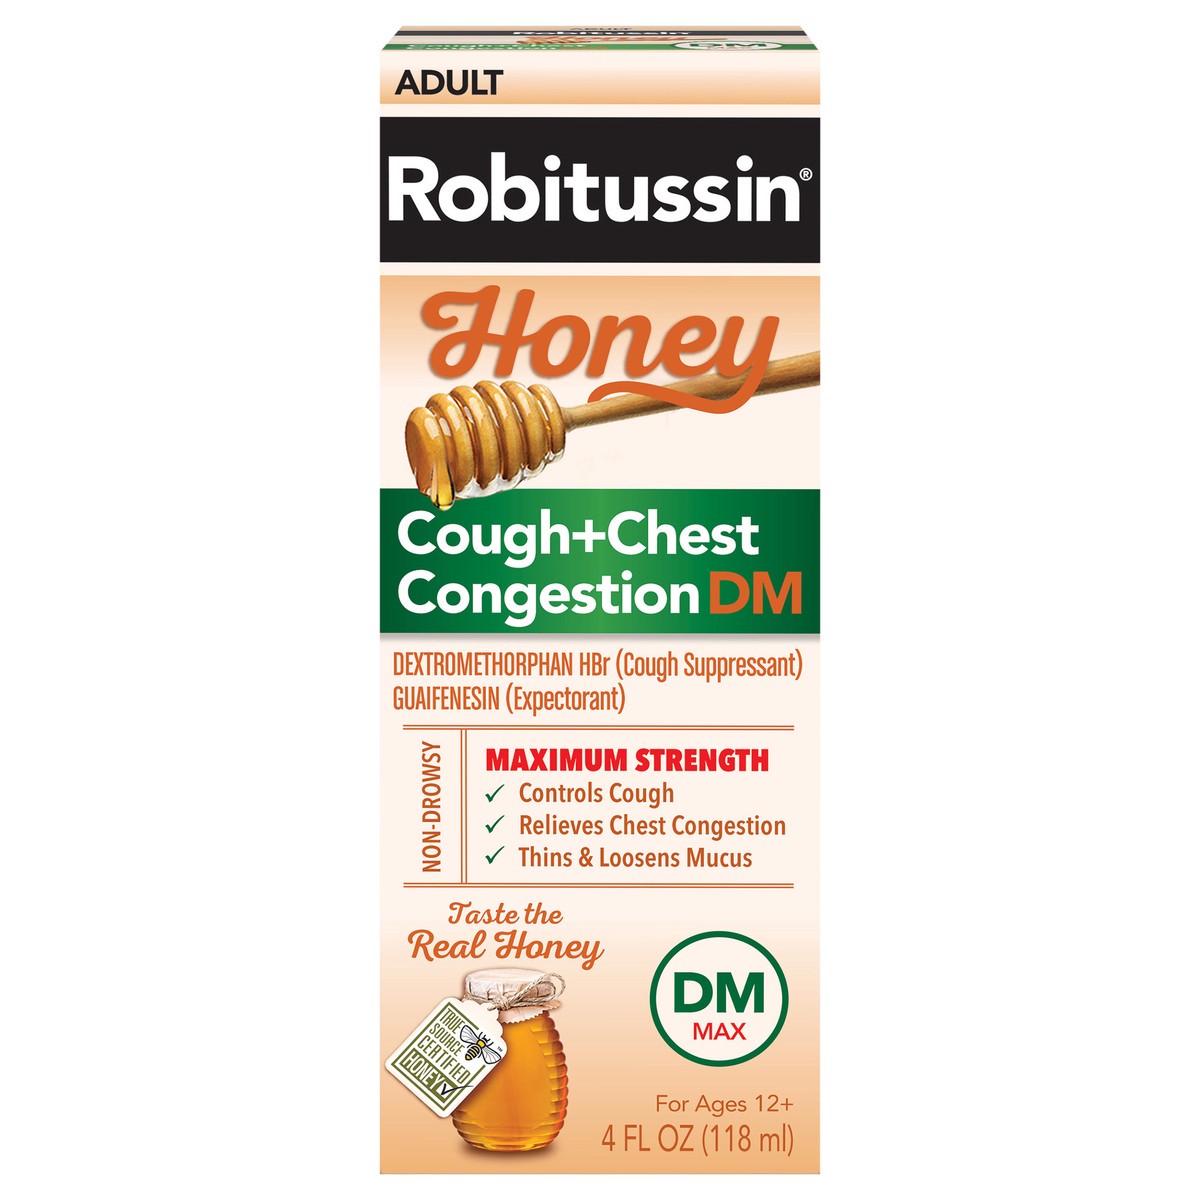 slide 1 of 9, Robitussin Maximum Strength Honey Cough + Chest Congestion DM, Cough Medicine for Cough and Chest Congestion Relief Made with Real Honey - 4 Fl Oz Bottle, 4 fl oz